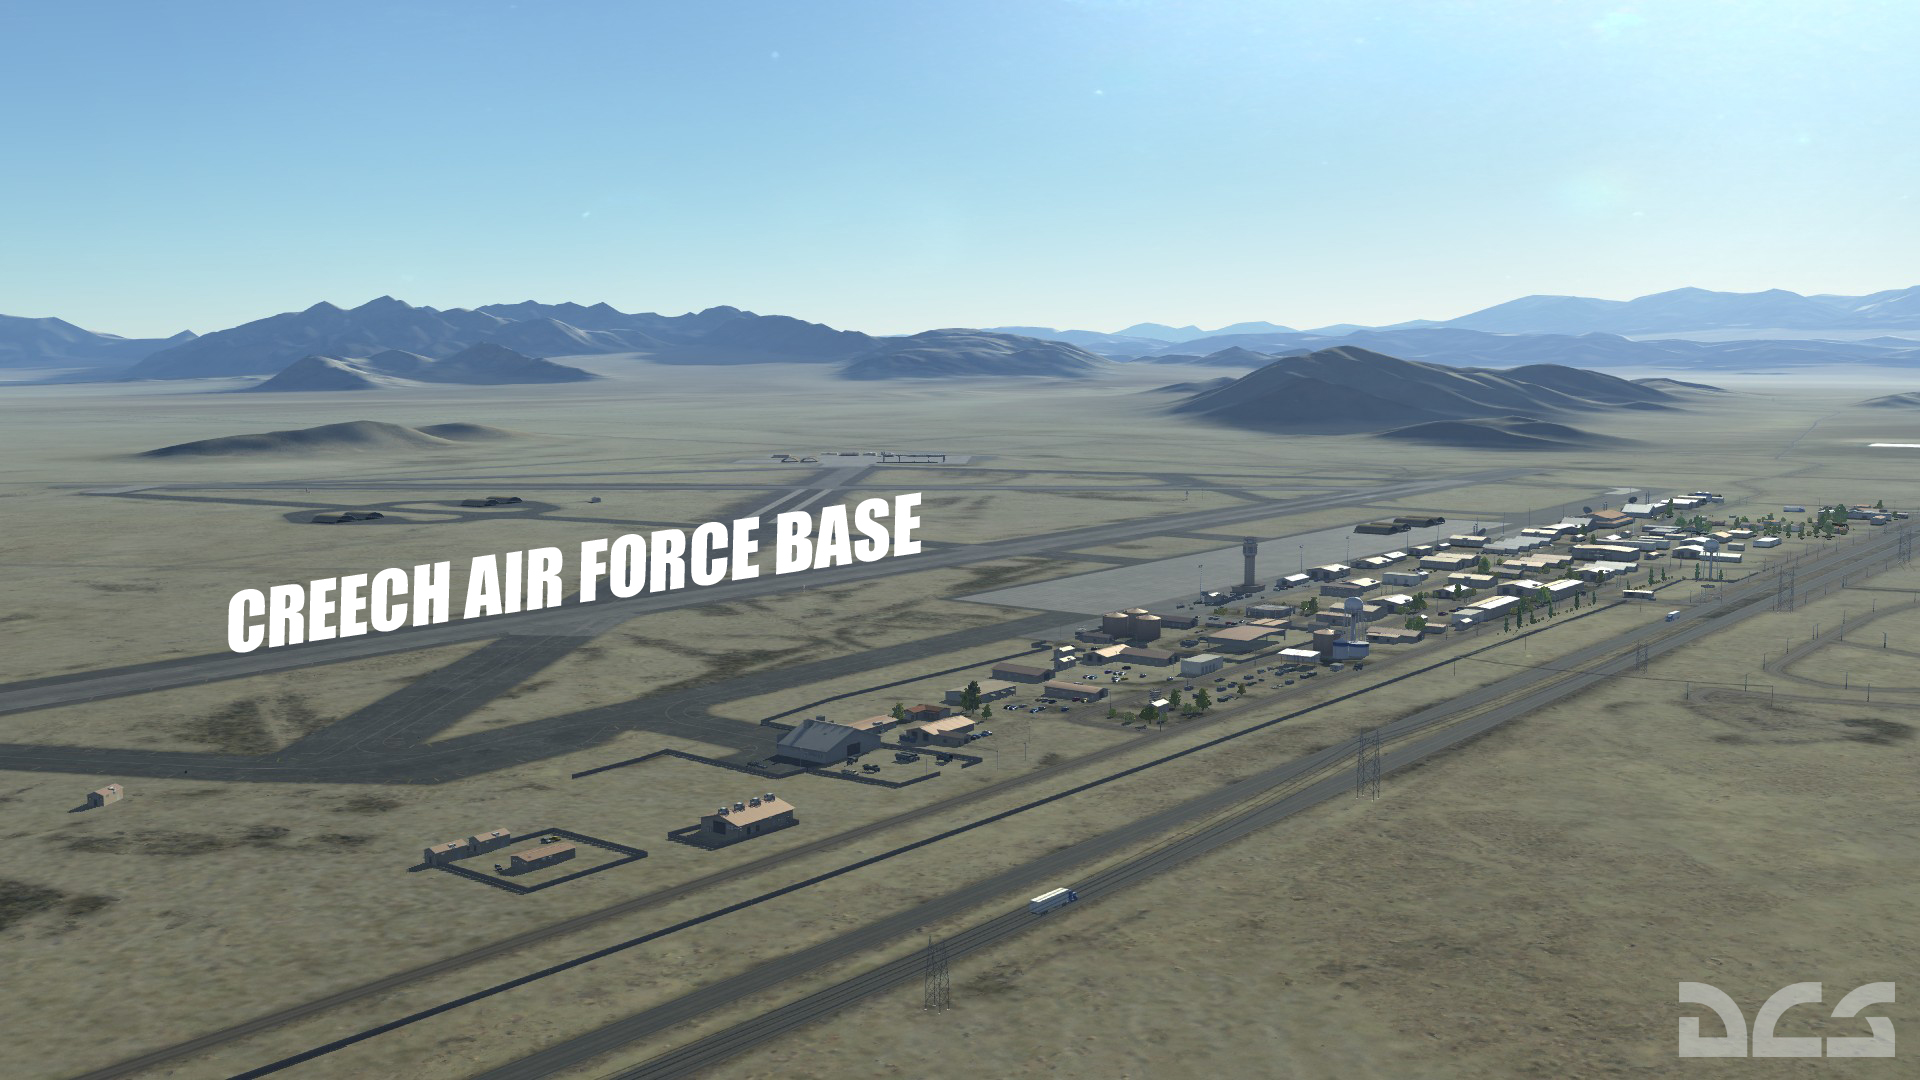 DCS 2 changelogs and updates - Official Updates - ED Forums